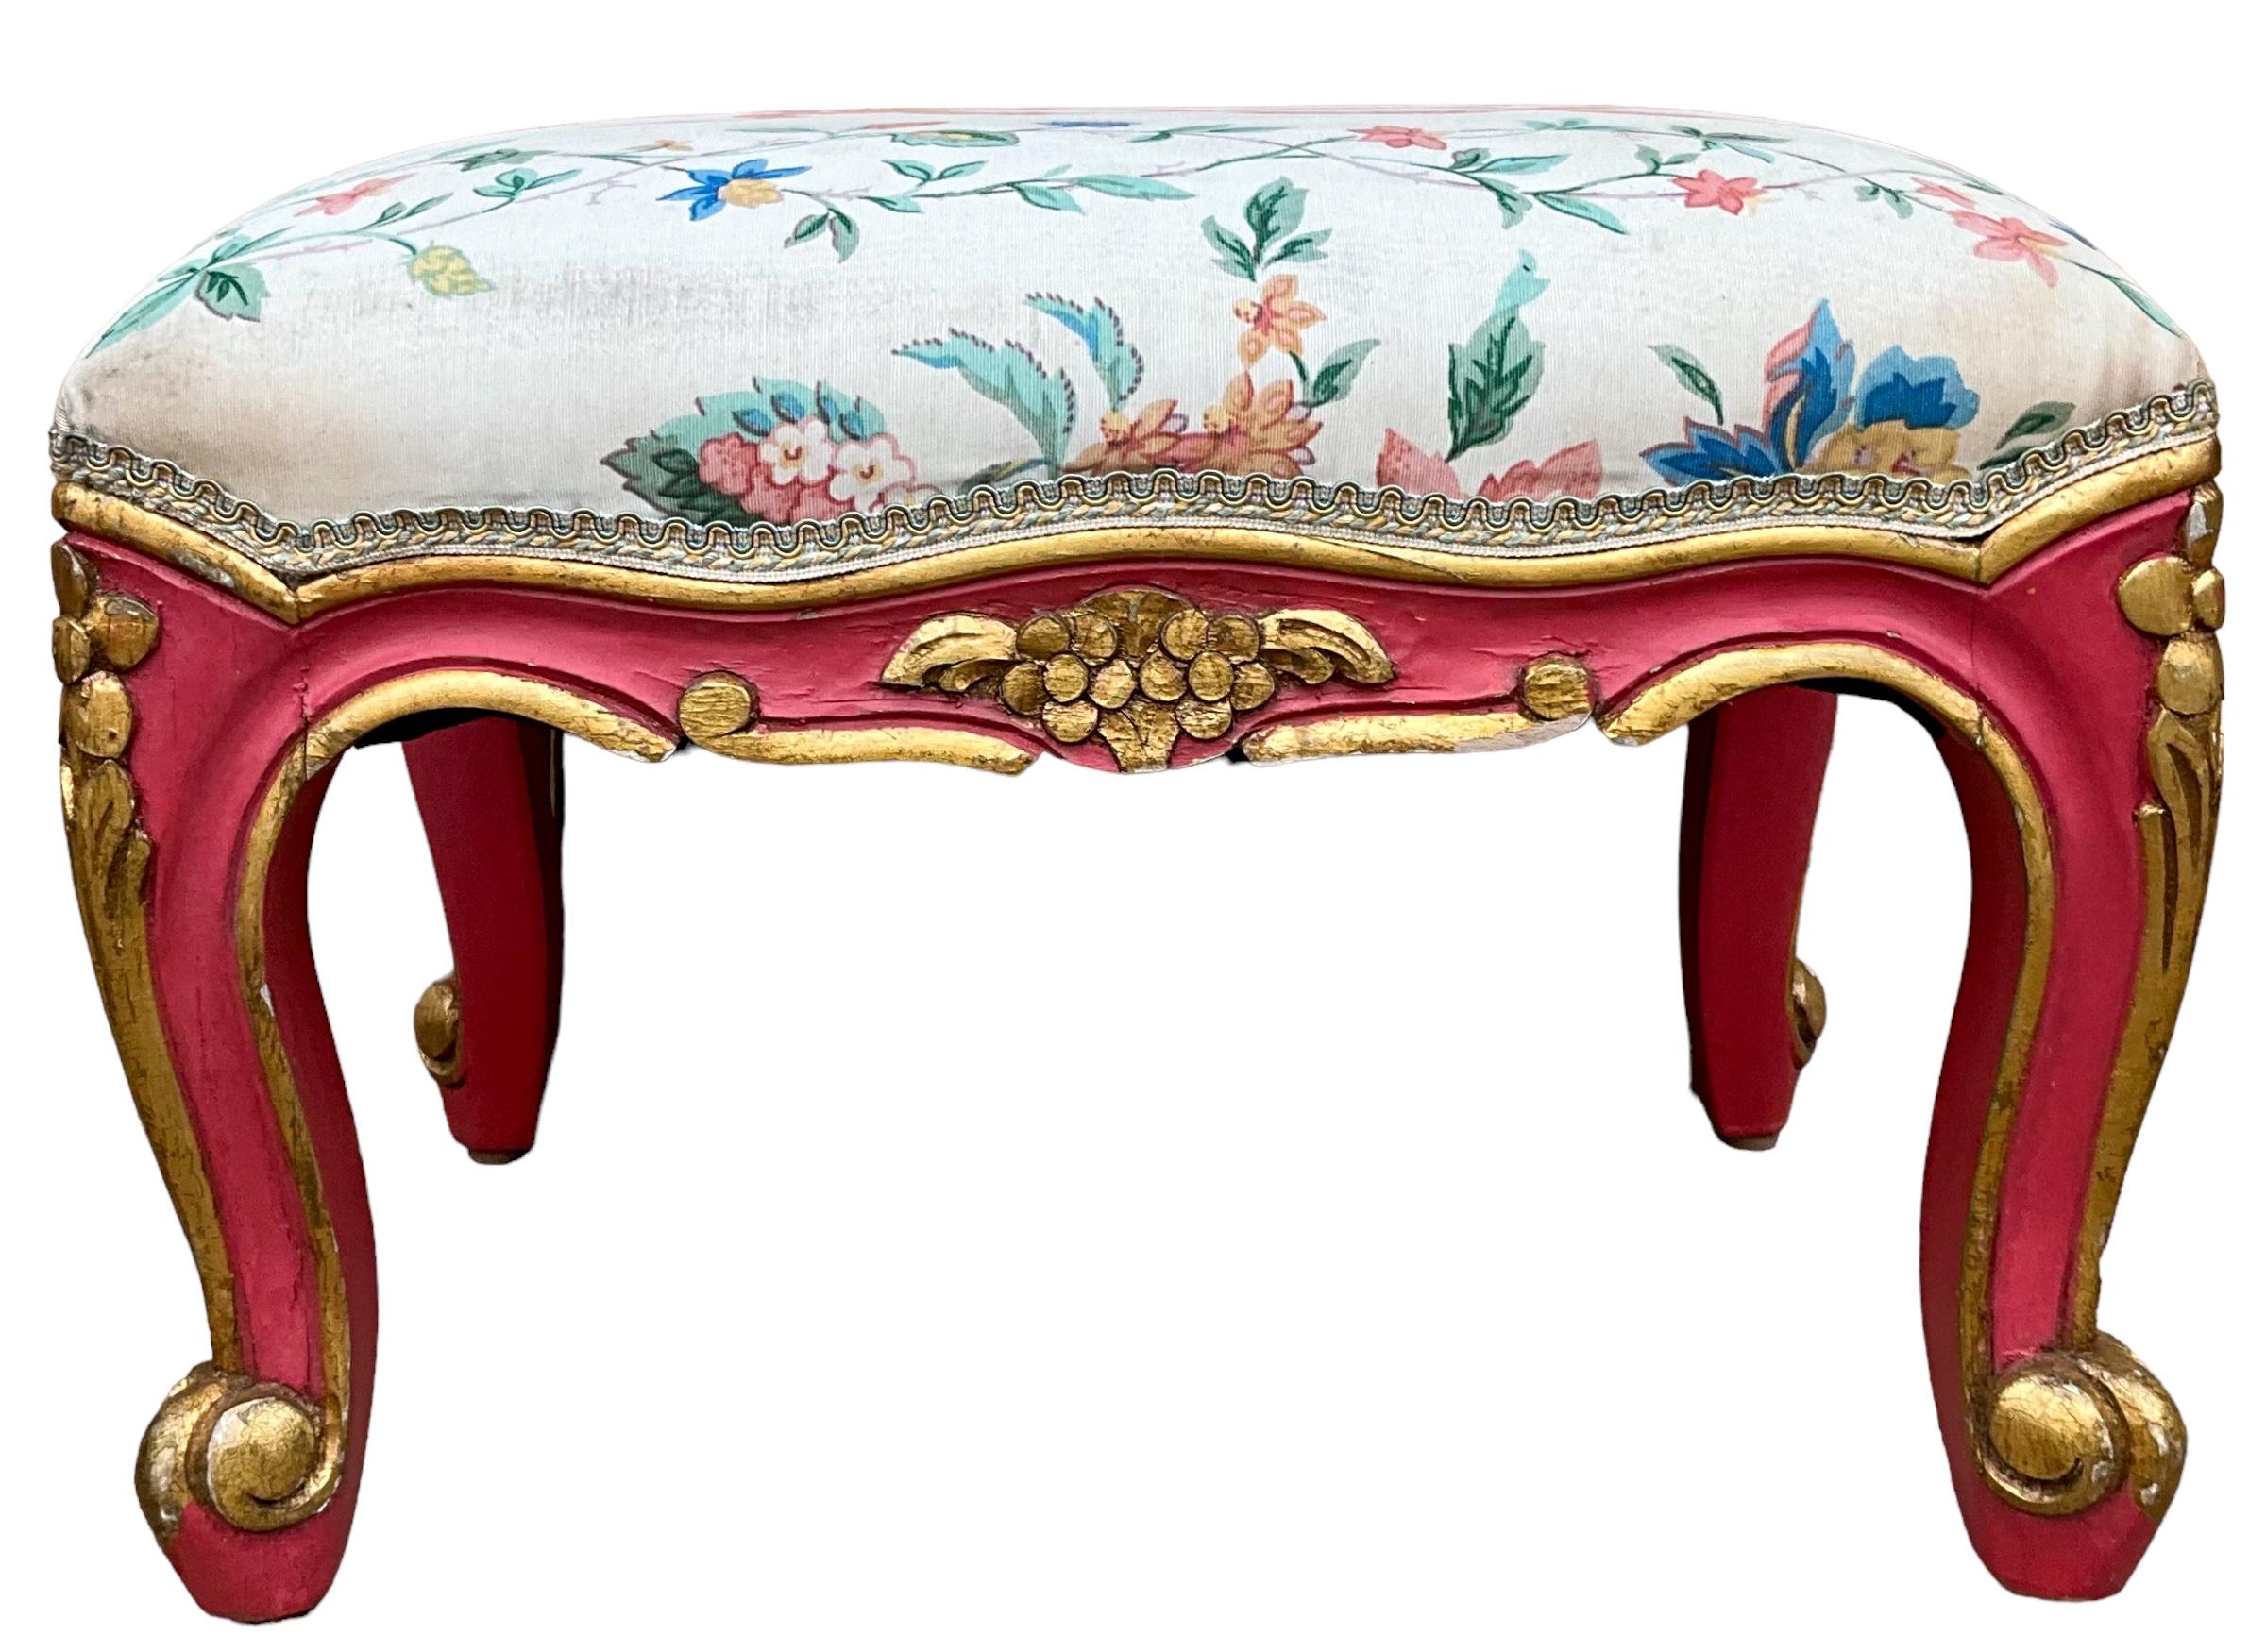 This is a pair of mid-century Venetian Louis XV style ottomans. They are painted pink with gilt floral accents and trim. Sadly, the upholstery is in need of replacing. They are unmarked.